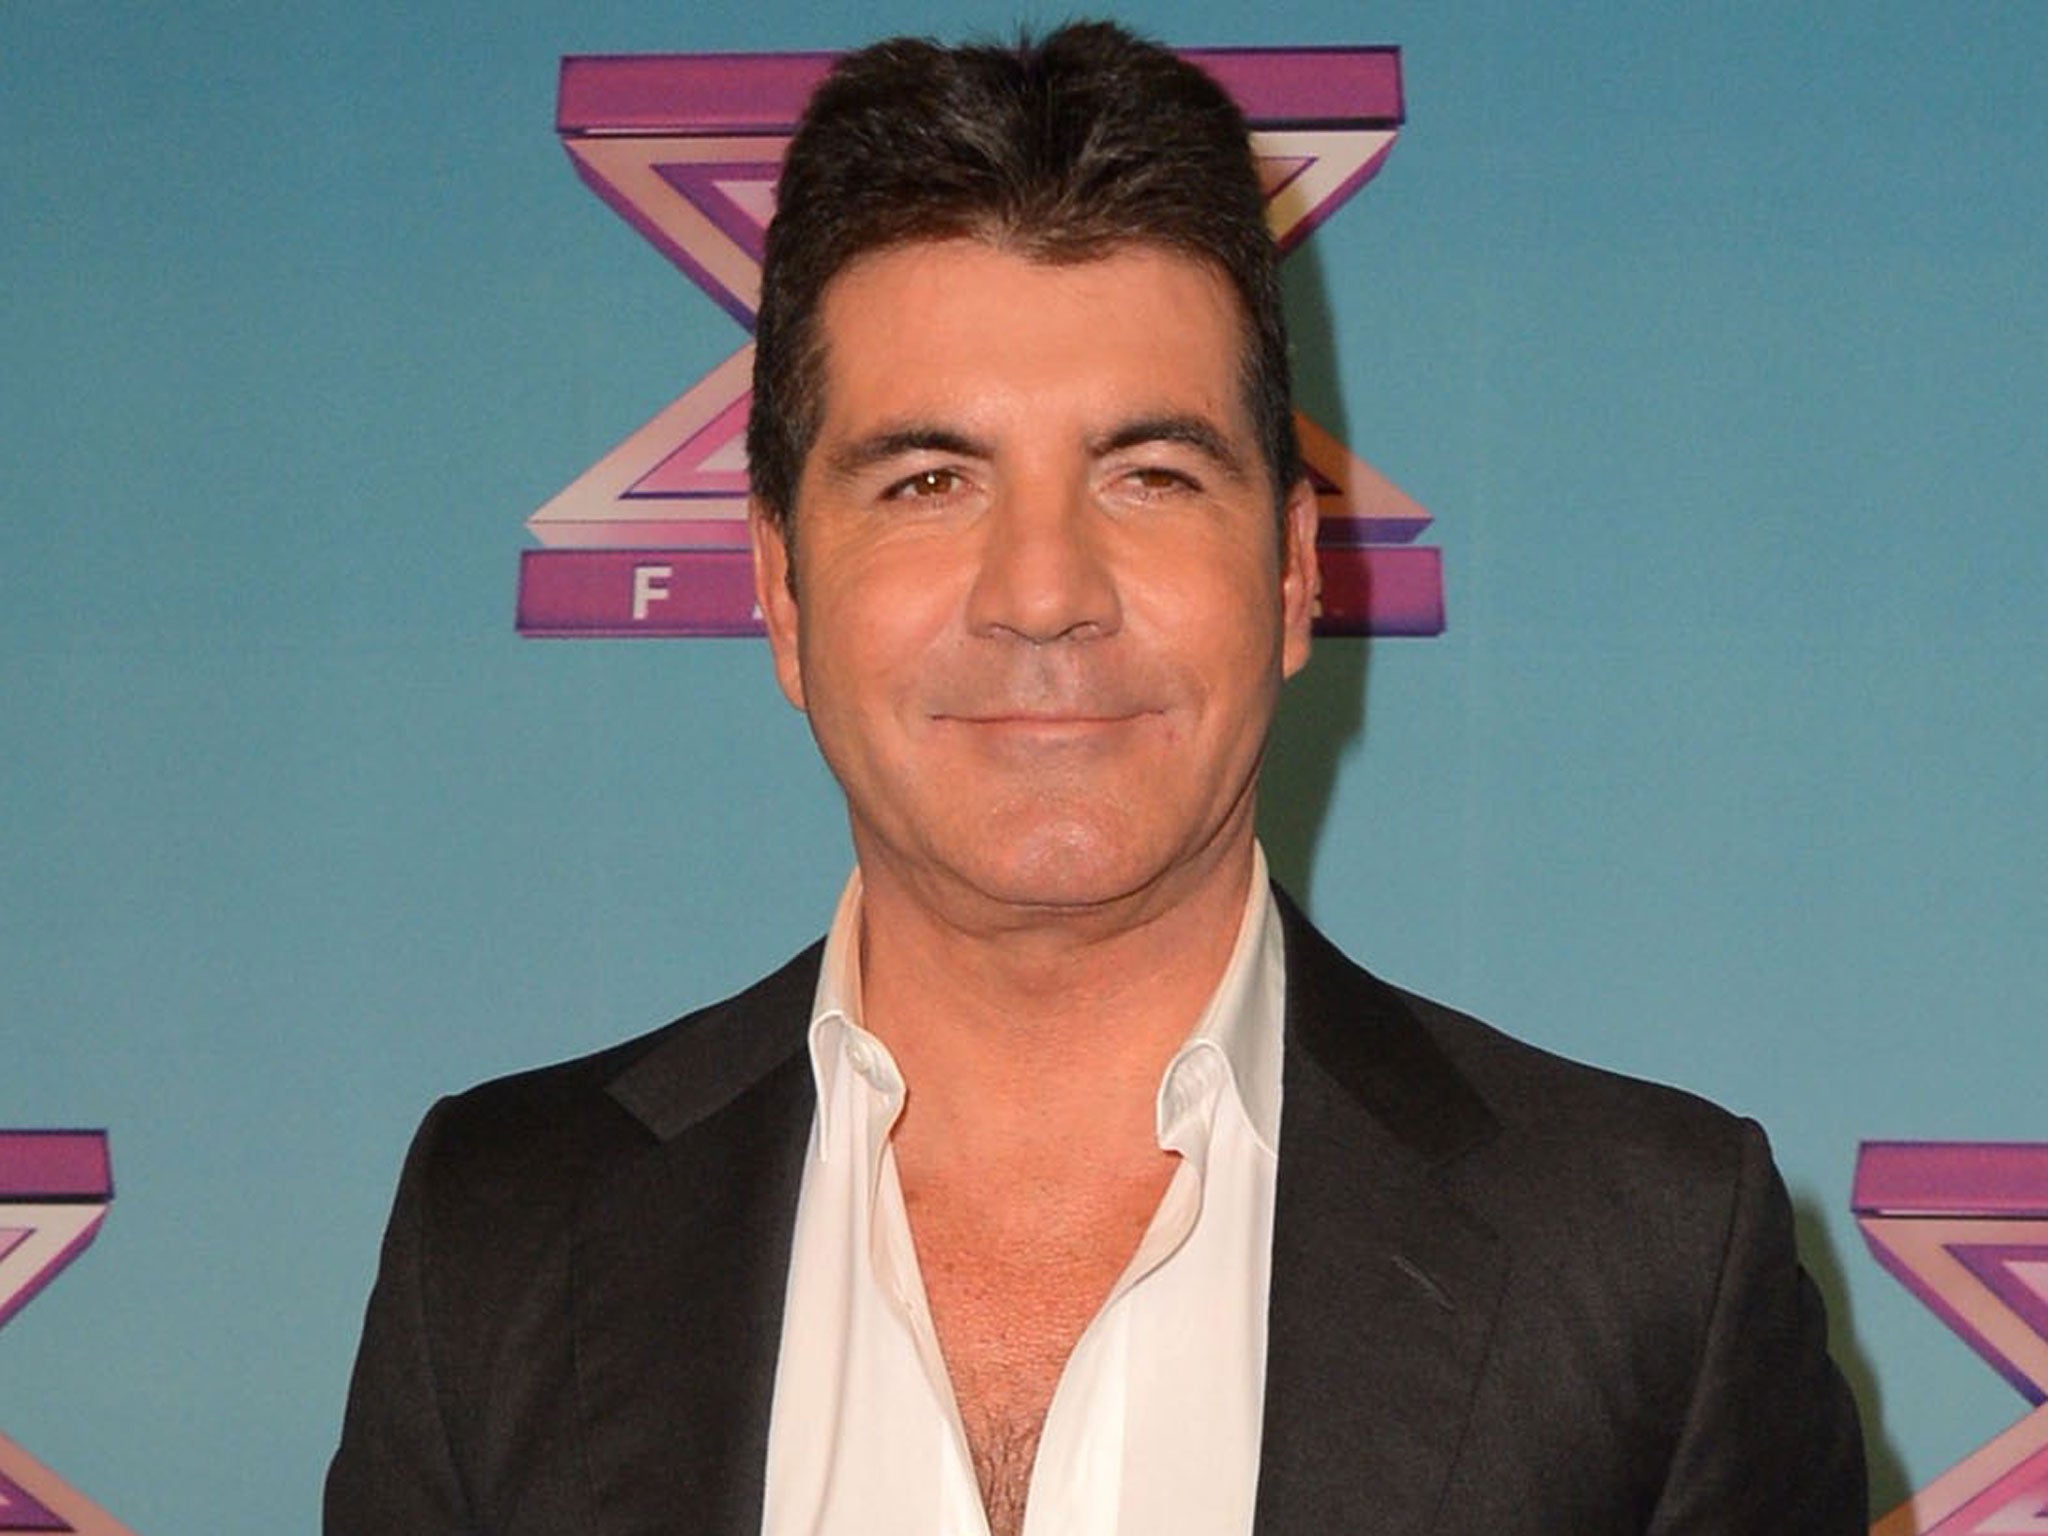 Simon Cowell is set to be a father, according to reports